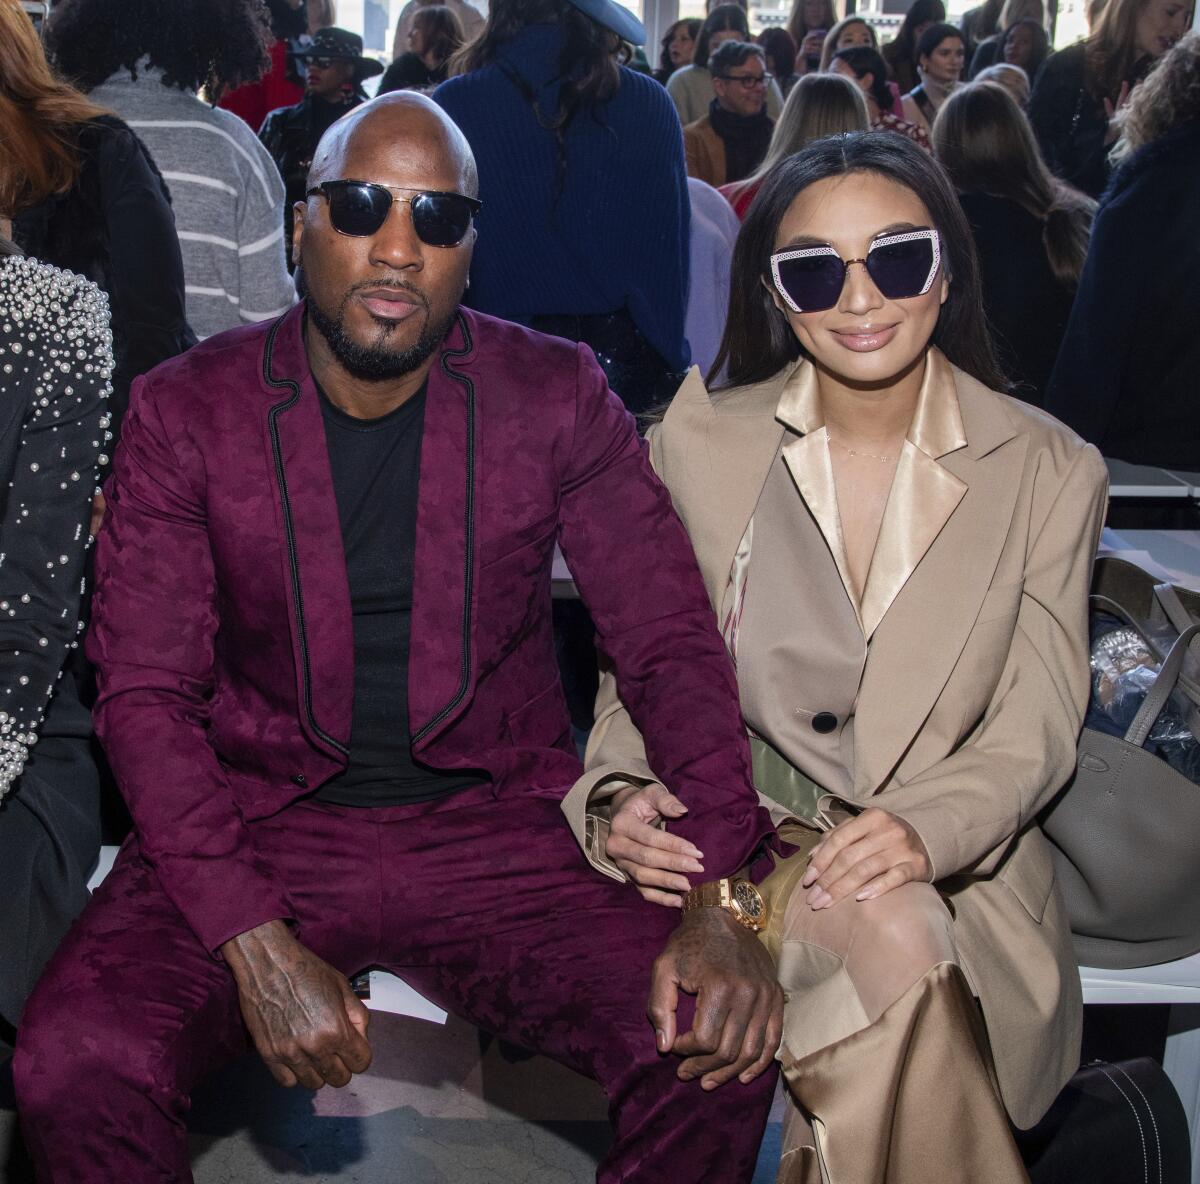 A bald Black man in a maroon suit and sunglasses sits with an Asian woman with long hair in a beige suit and sunglasses.